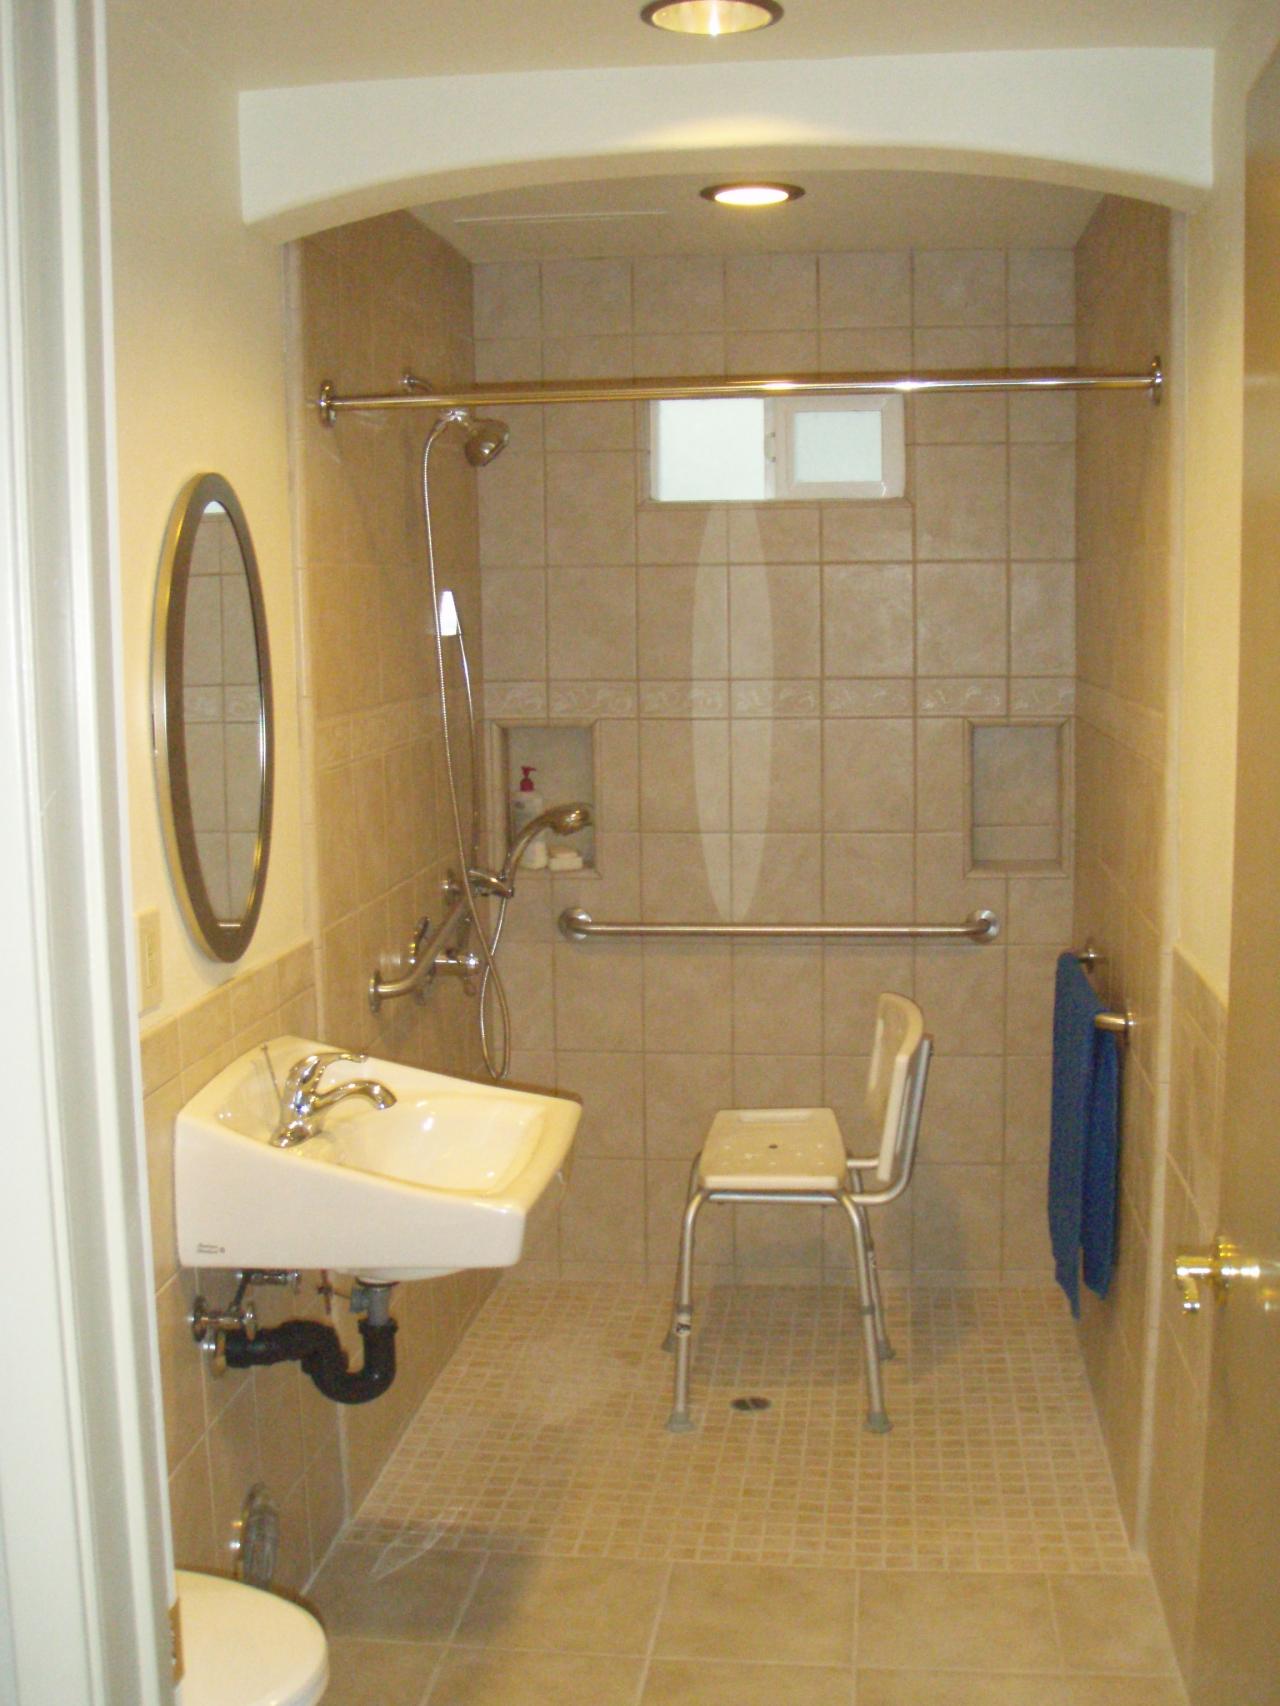 handicapped accessible home plans